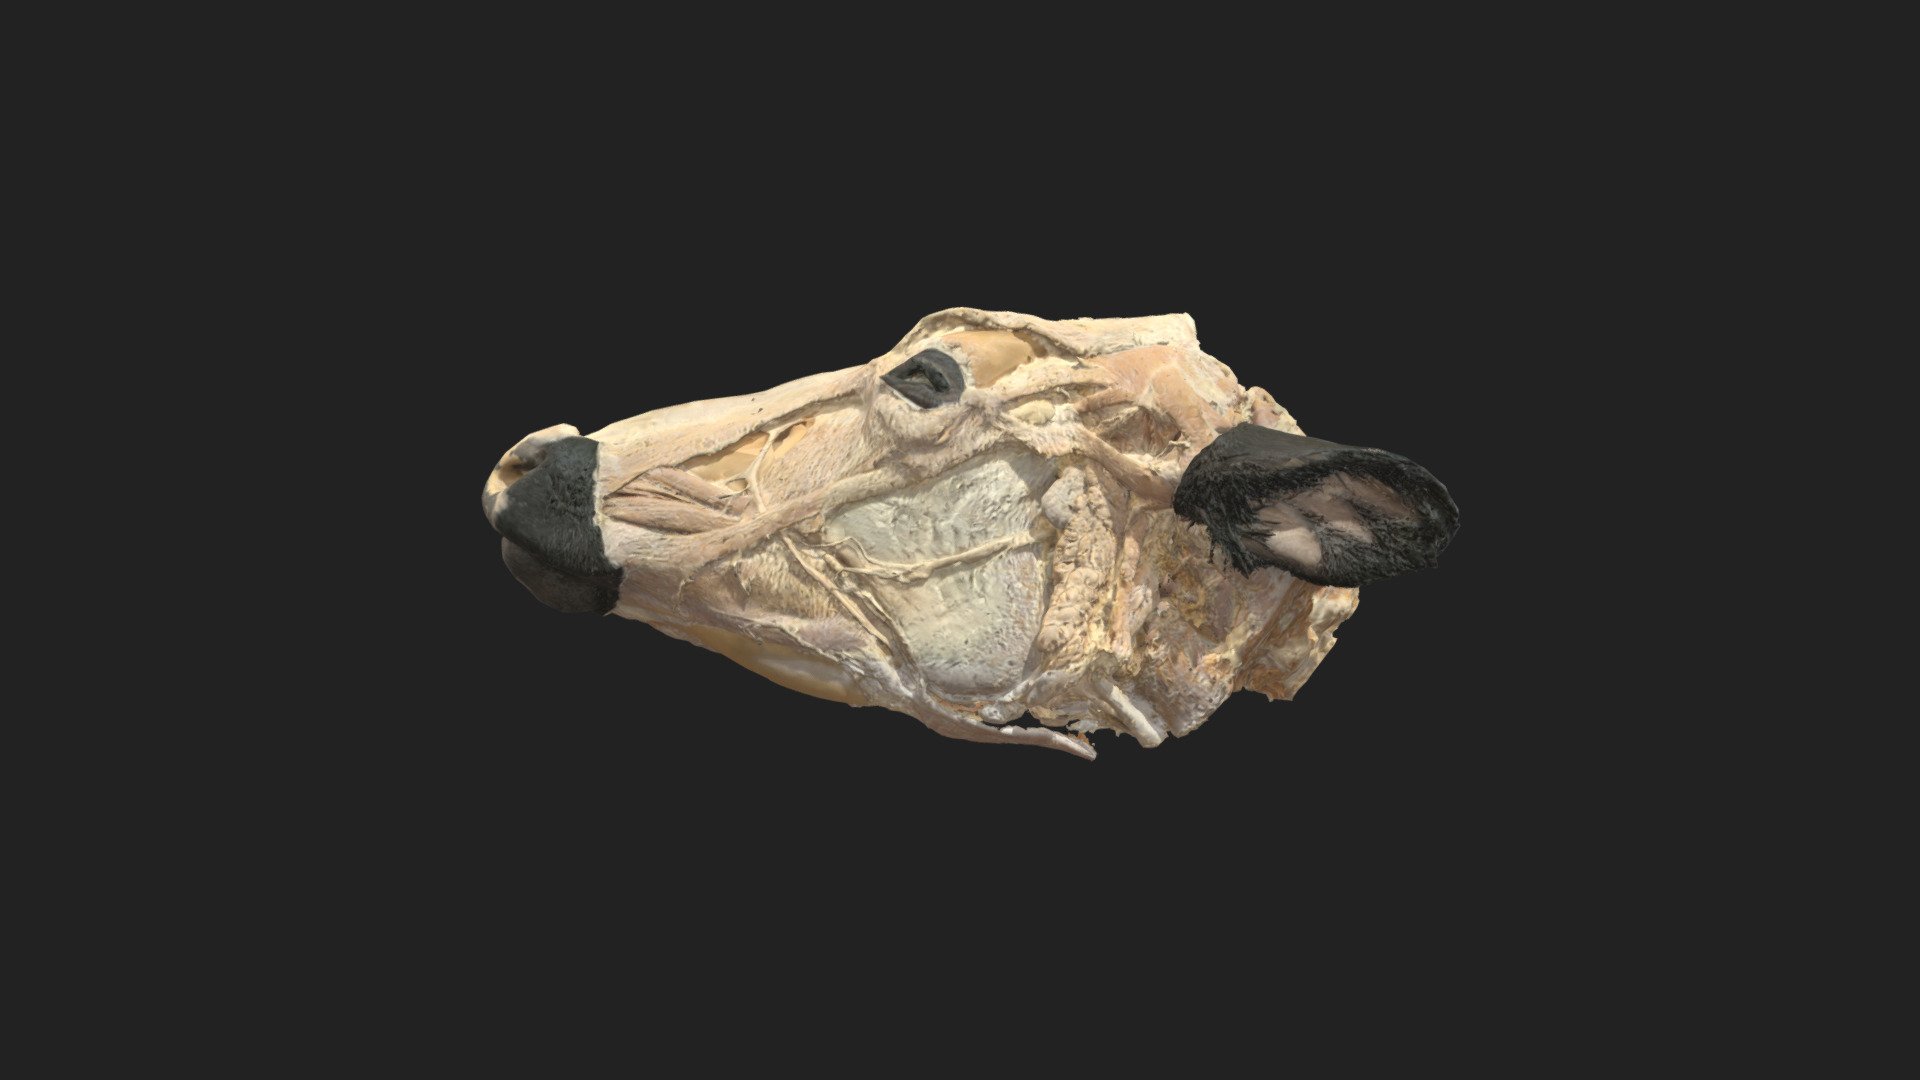 a halved head of a bovine 

size of specimen: 665.4 x 309.1 x 123 mm

3D scanning performed with the structured light scanners &ldquo;Artec Leo